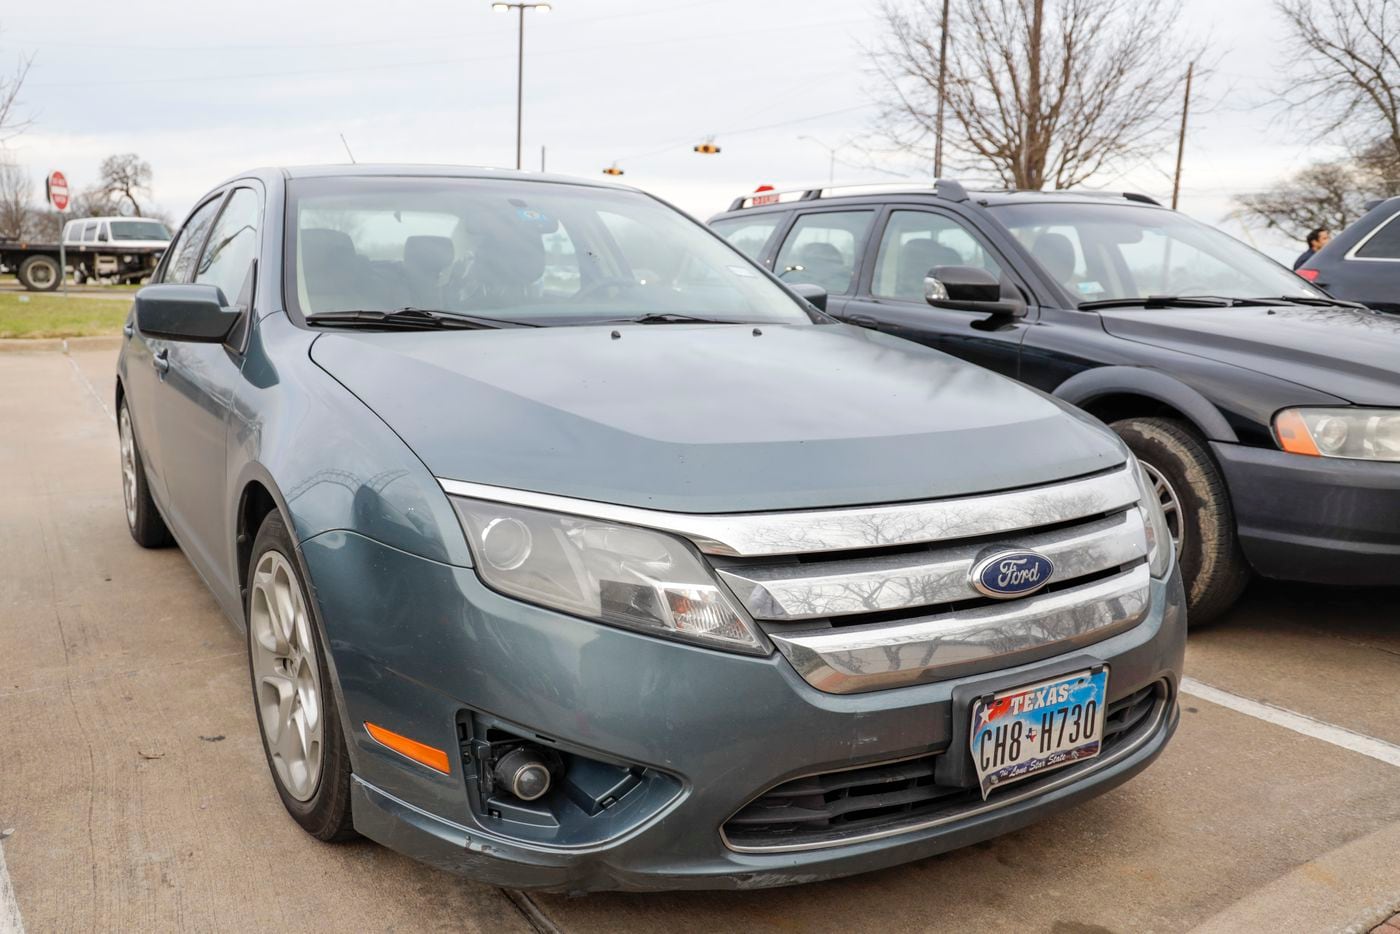 A blue Ford Fusion registered to Dallas City Council member Kevin Felder's address is parked...